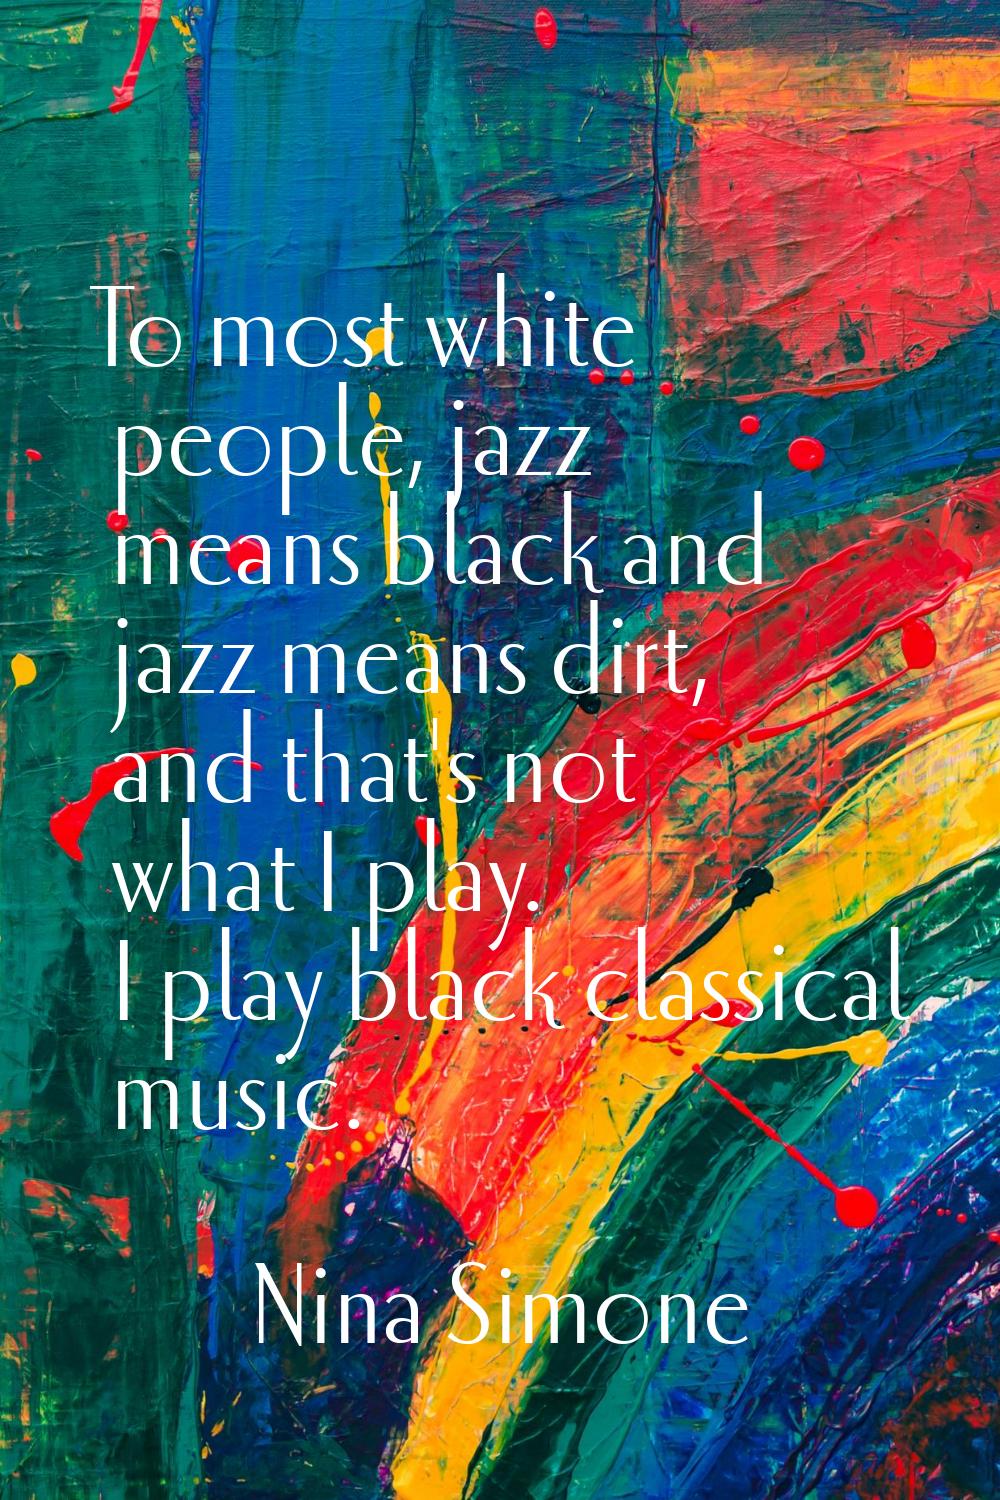 To most white people, jazz means black and jazz means dirt, and that's not what I play. I play blac